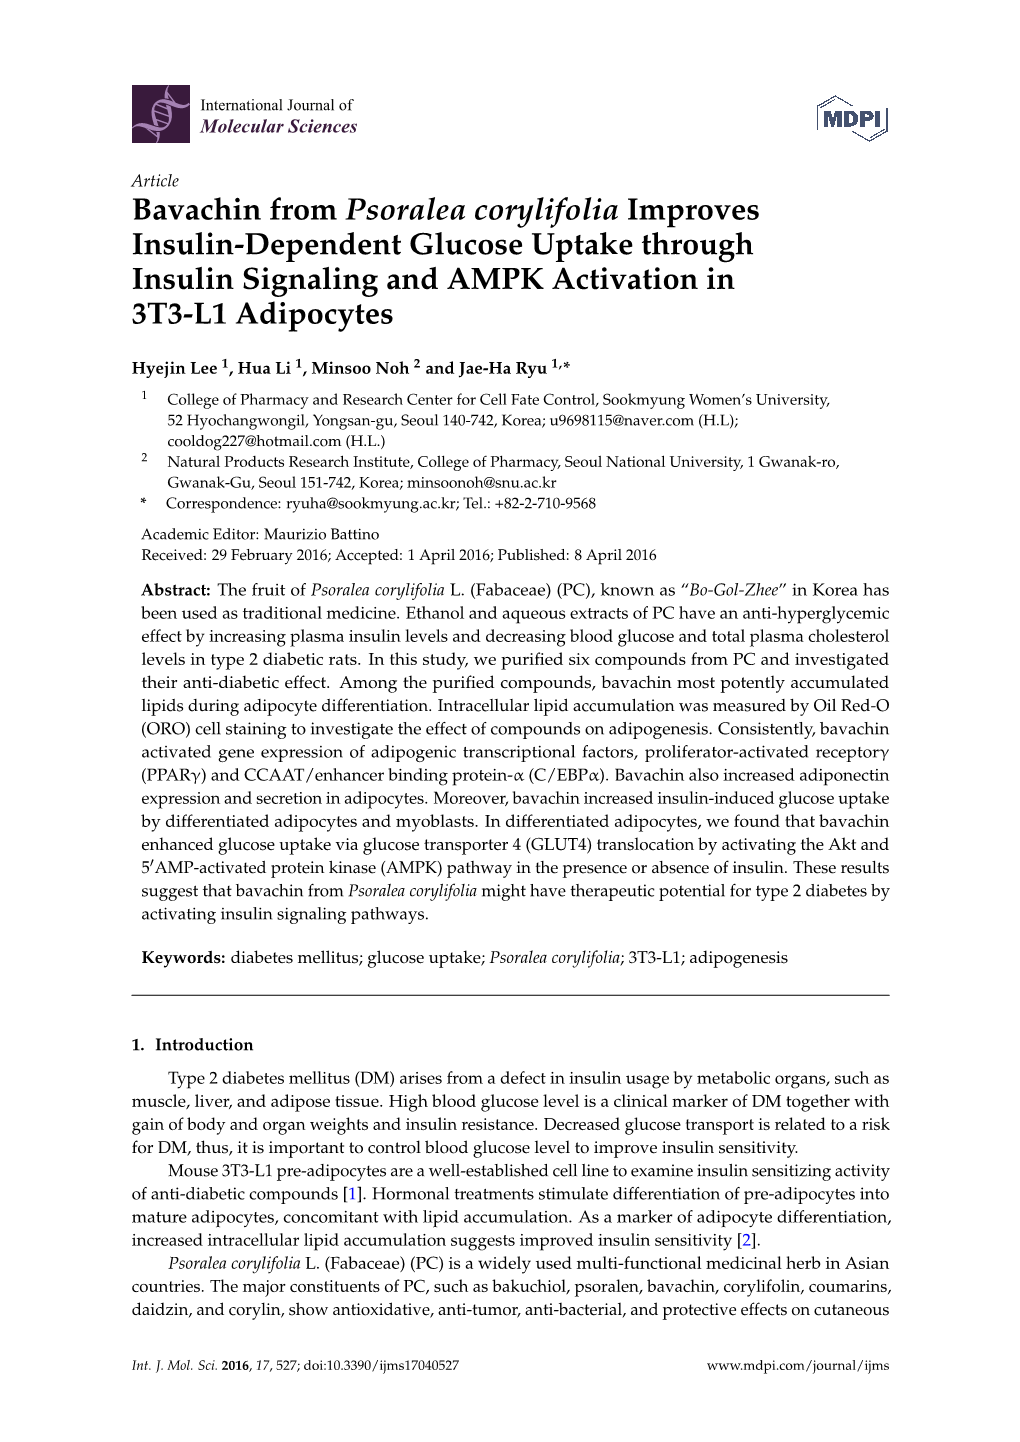 Bavachin from Psoralea Corylifolia Improves Insulin-Dependent Glucose Uptake Through Insulin Signaling and AMPK Activation in 3T3-L1 Adipocytes